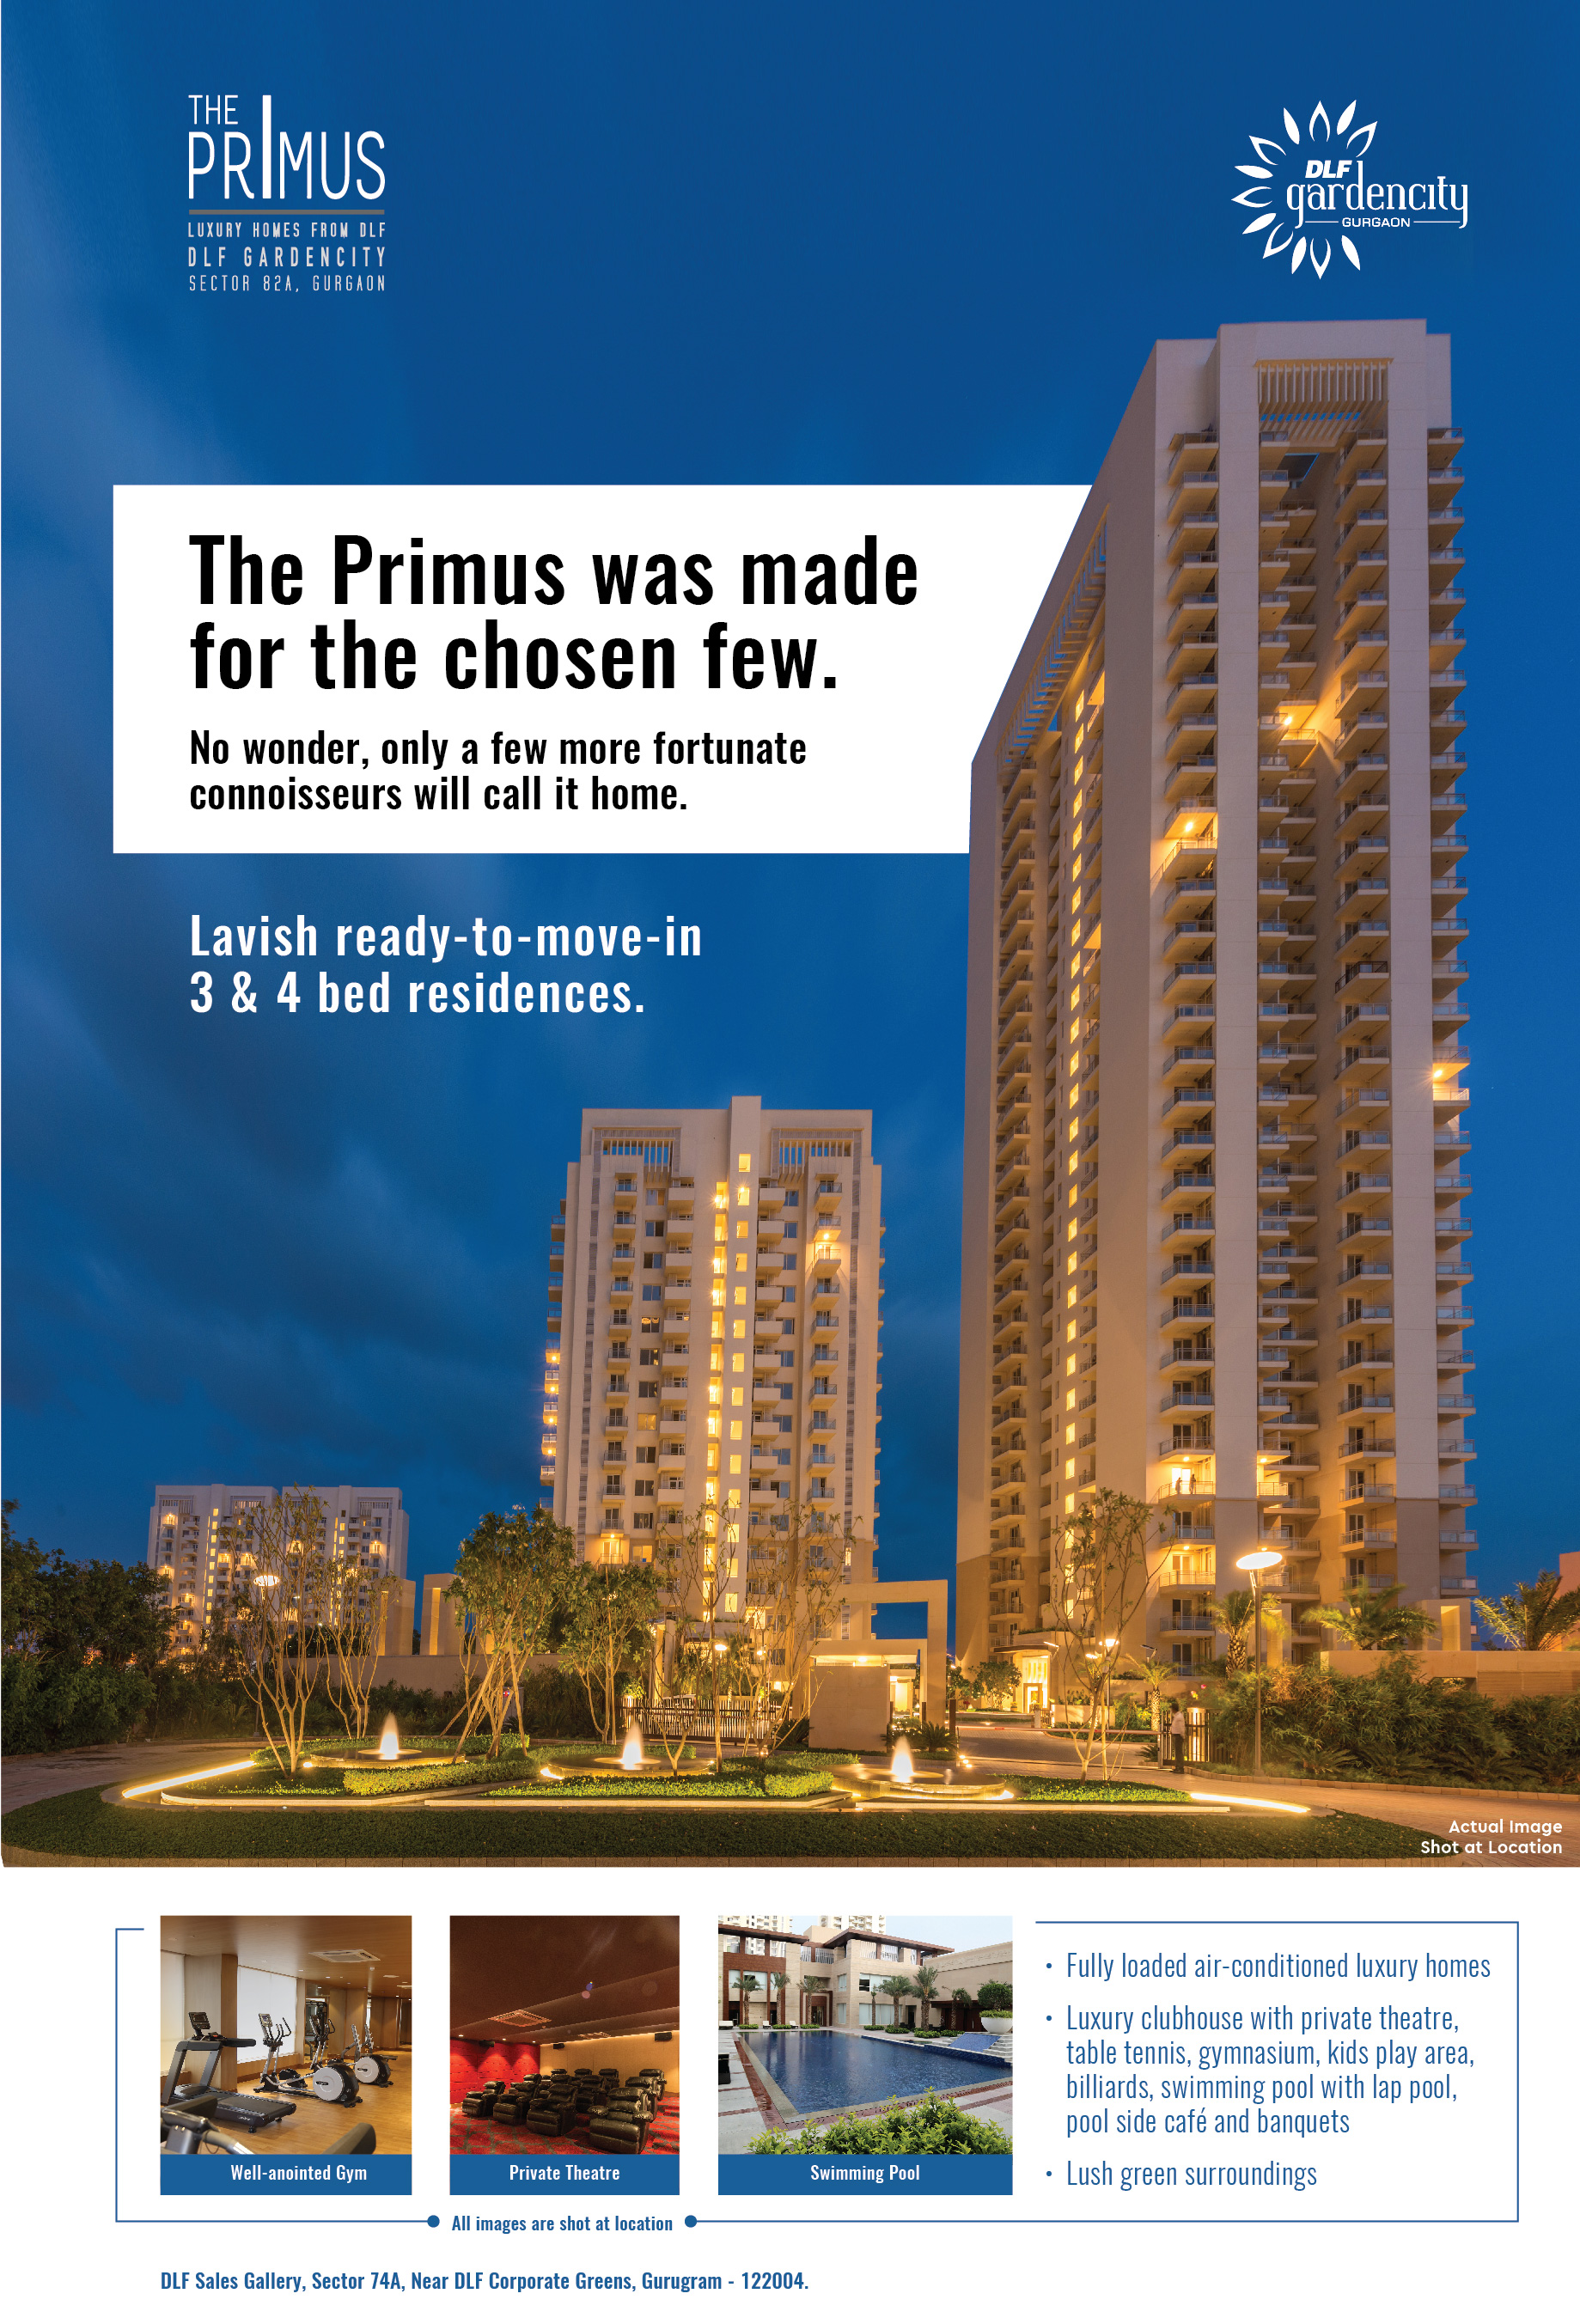 Live in Fully Loaded Ready To Move In Apartments at DLF Primus Update